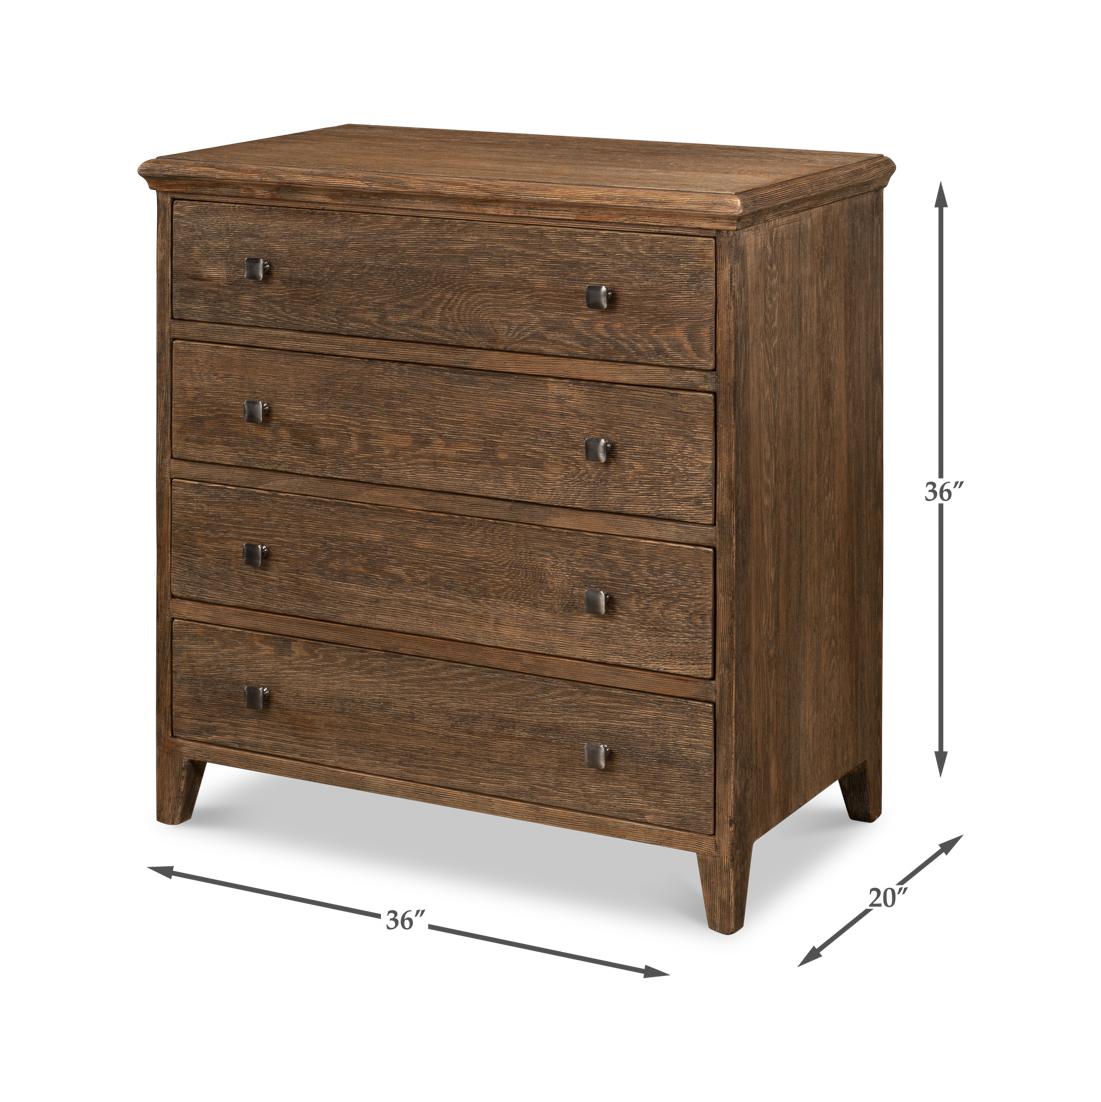 Wood Classic Four Drawer Chest For Sale